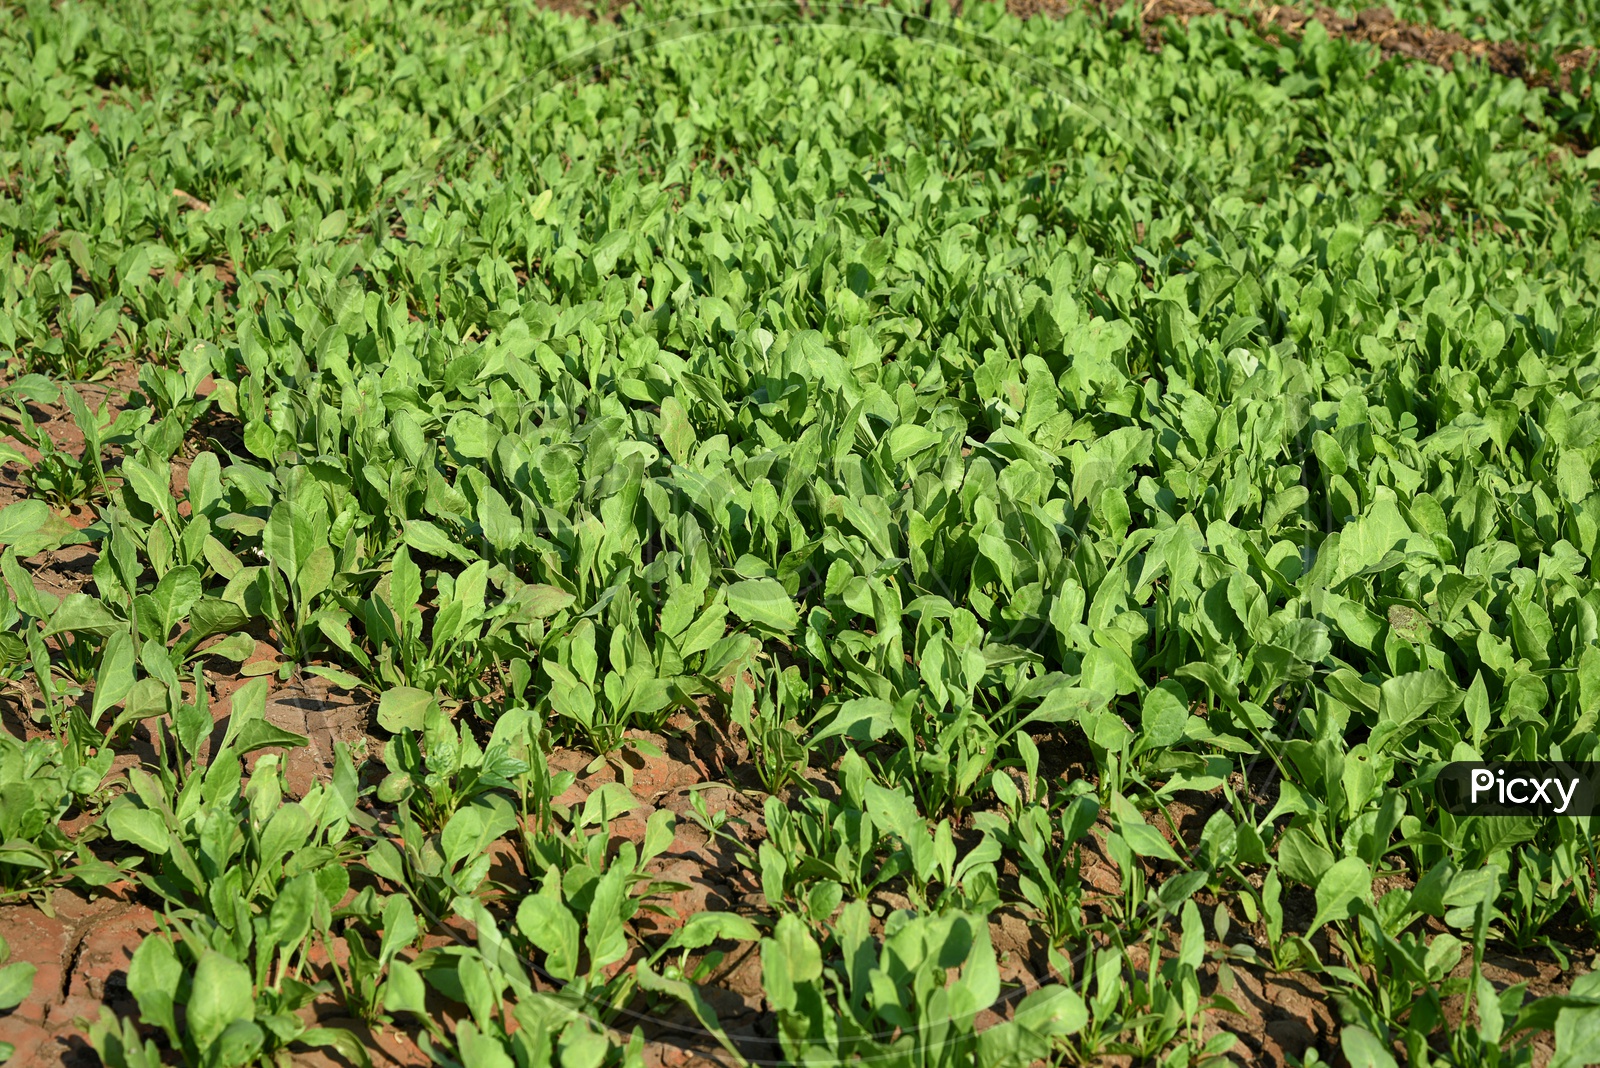 Fresh Green Leaves Growing In an Agricultural Farm